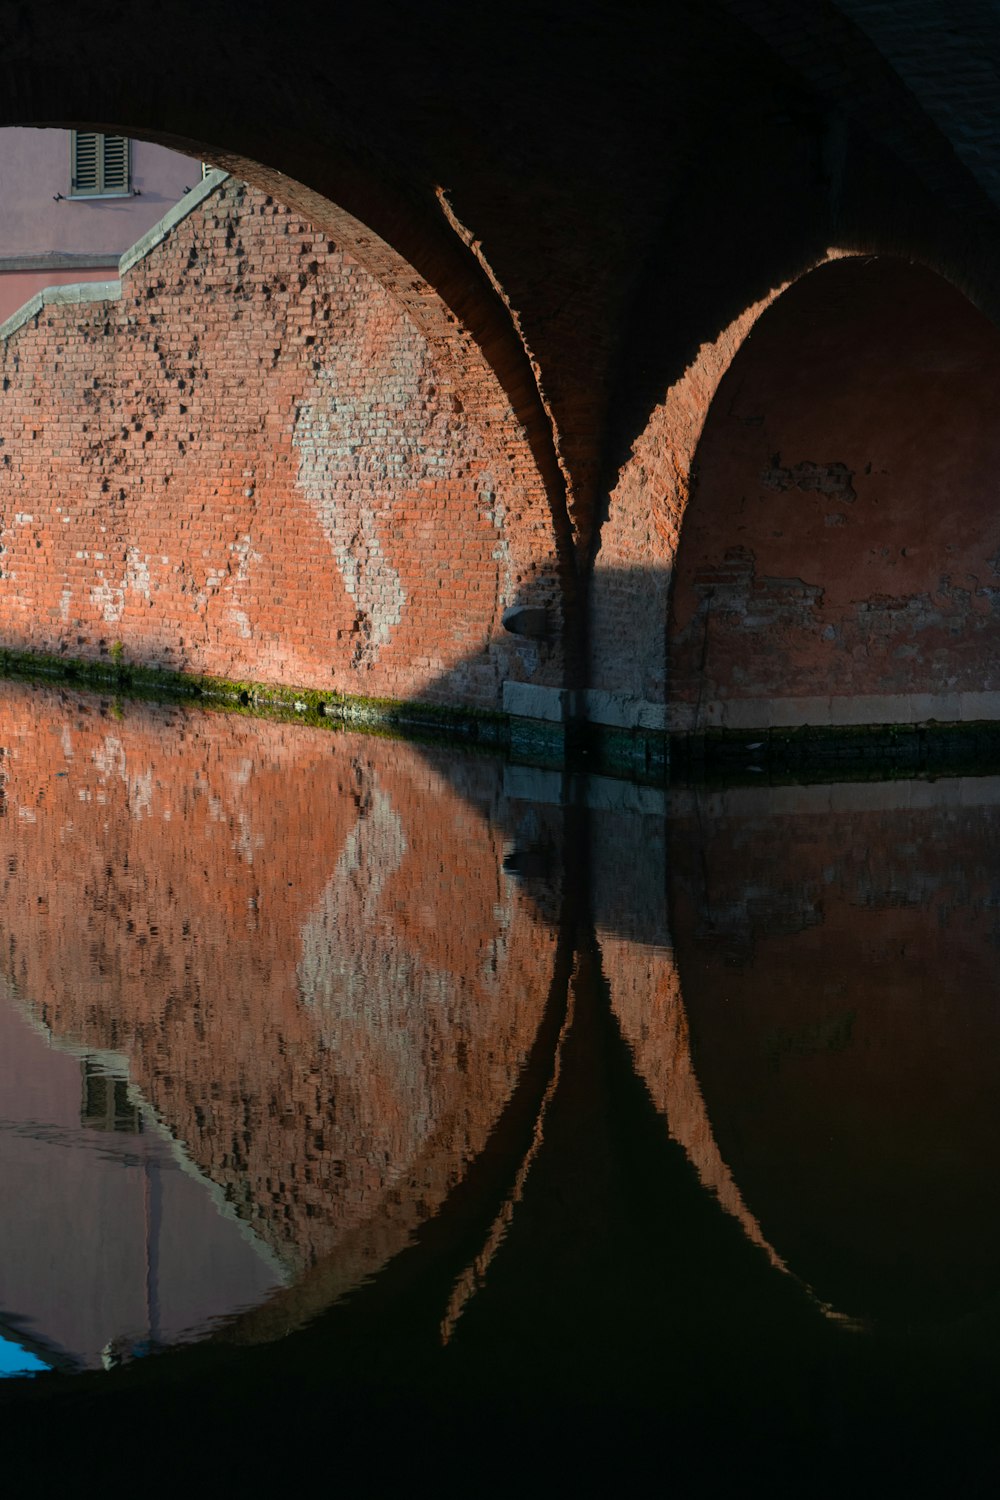 reflection of brown concrete bridge on water during daytime